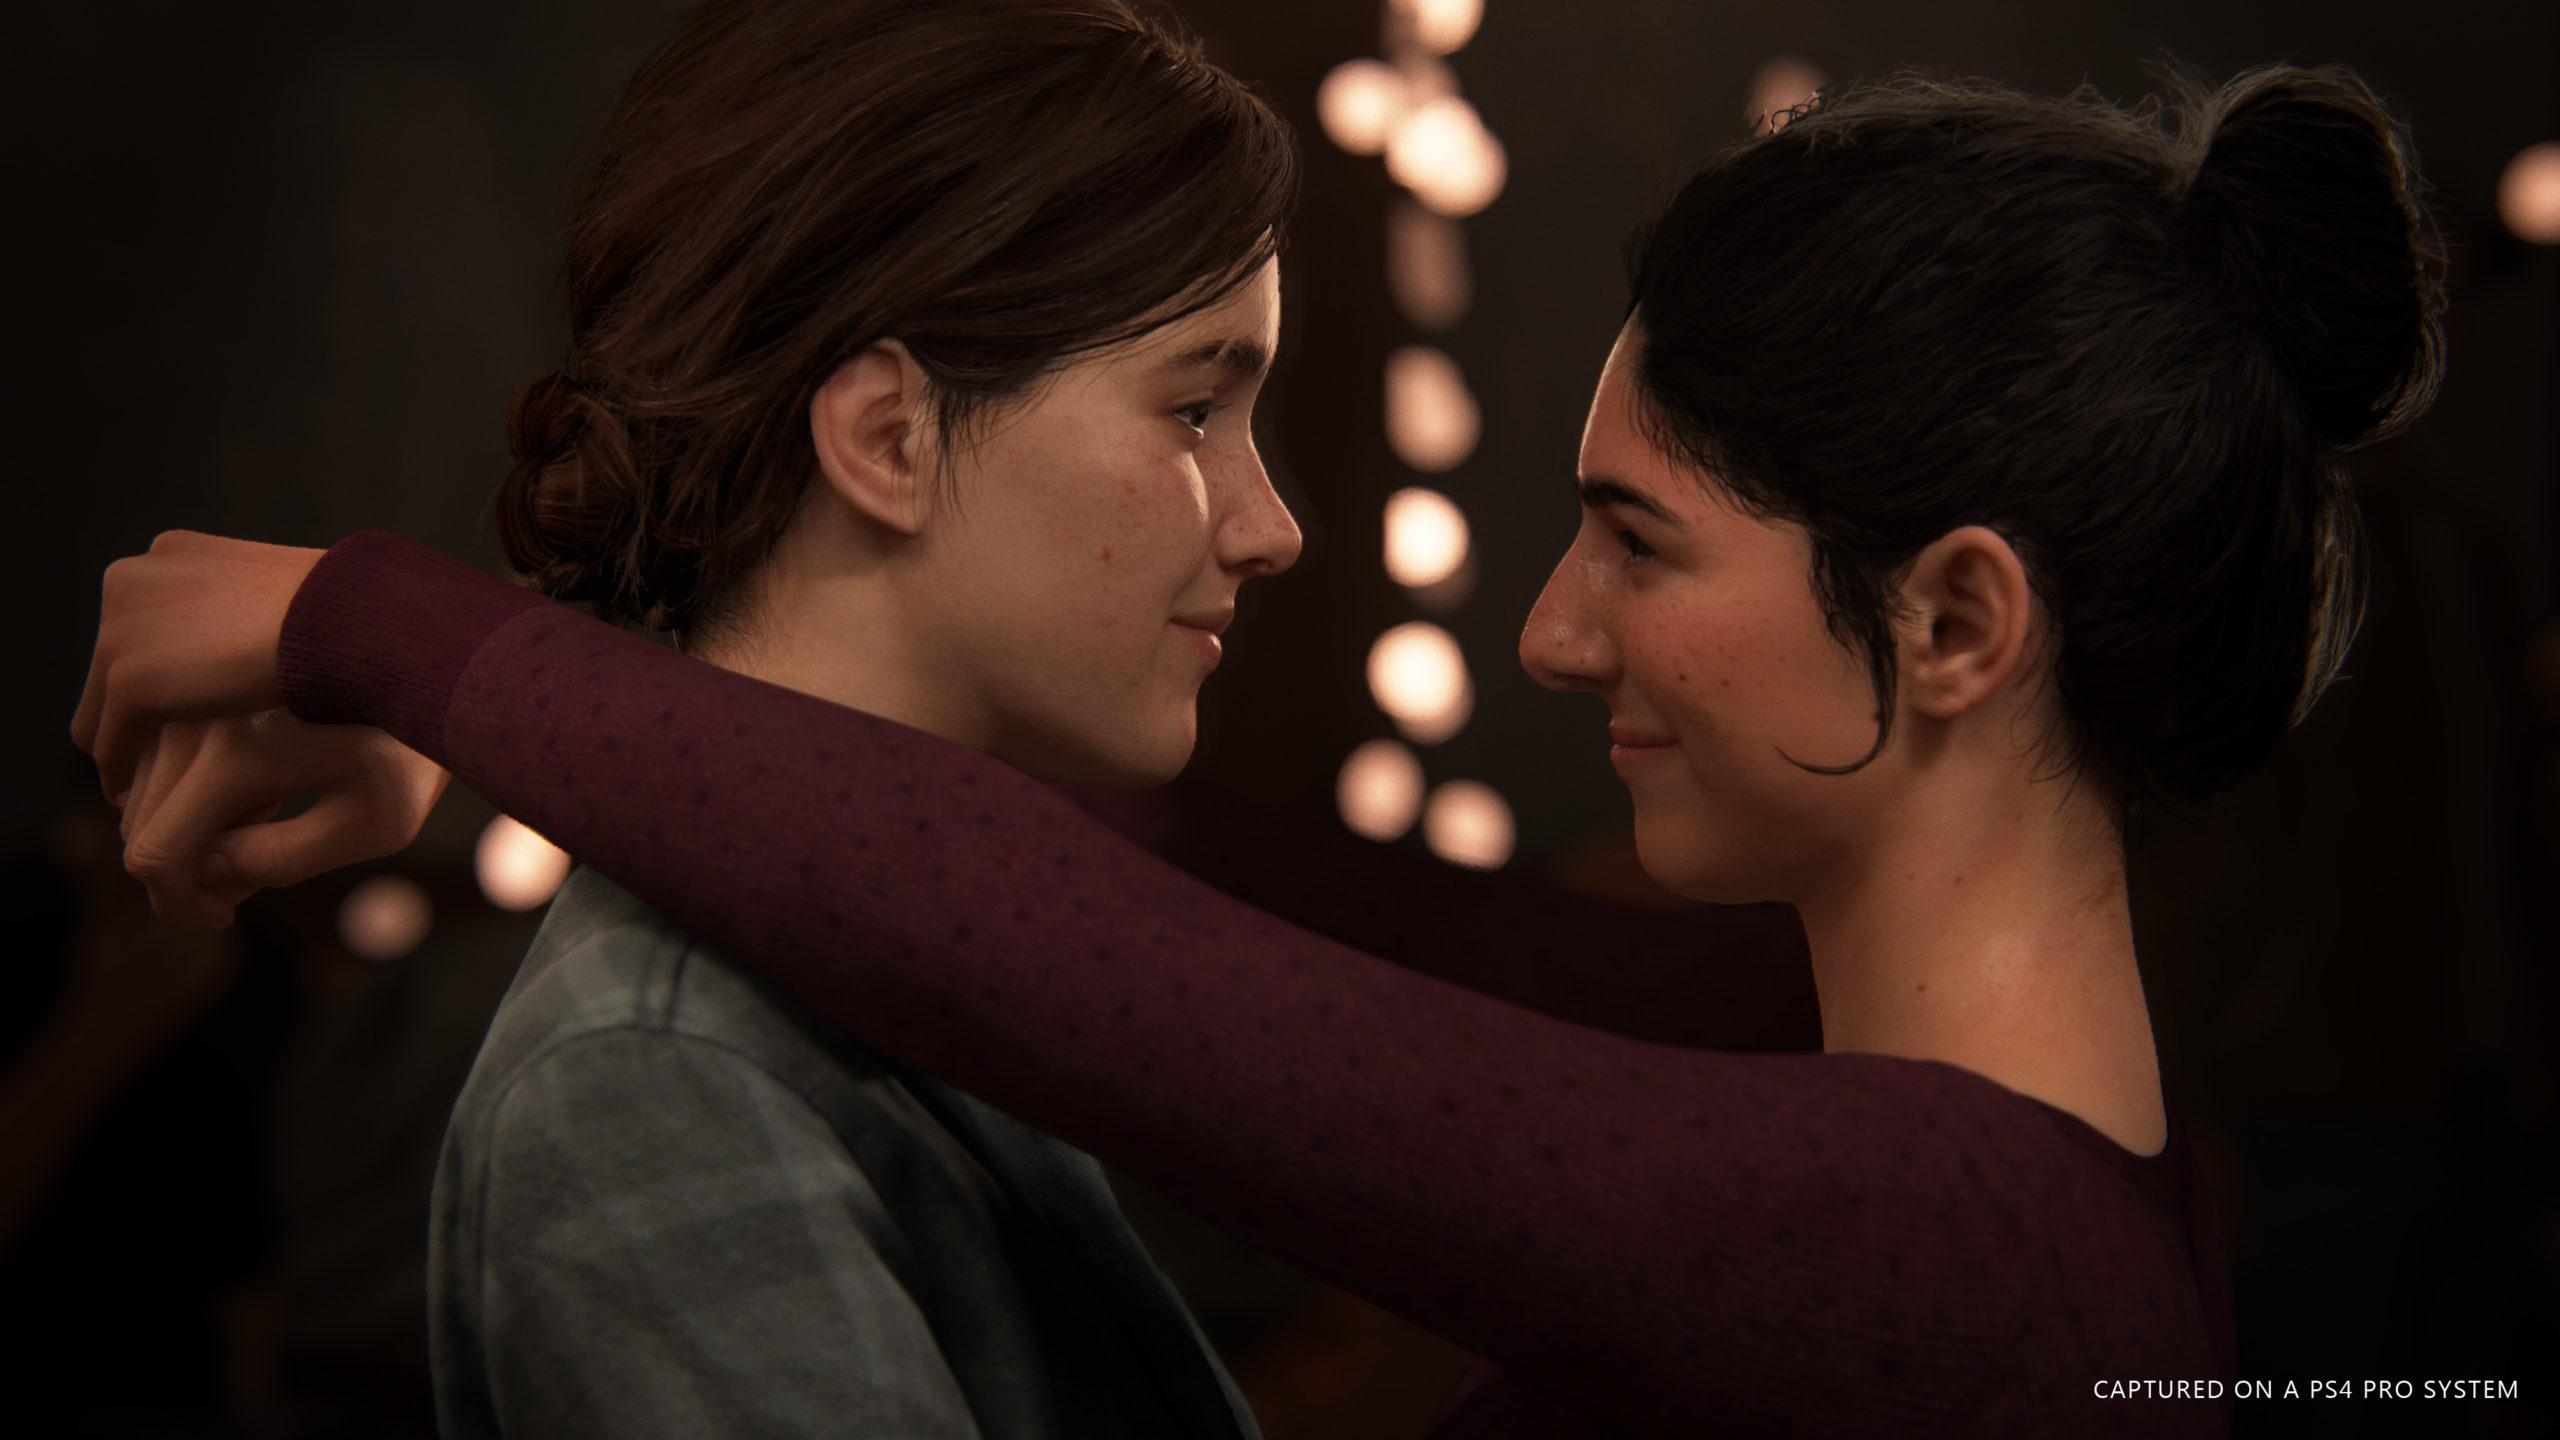 The Last of Us Part 2 Multiplayer: Will Factions make a return to